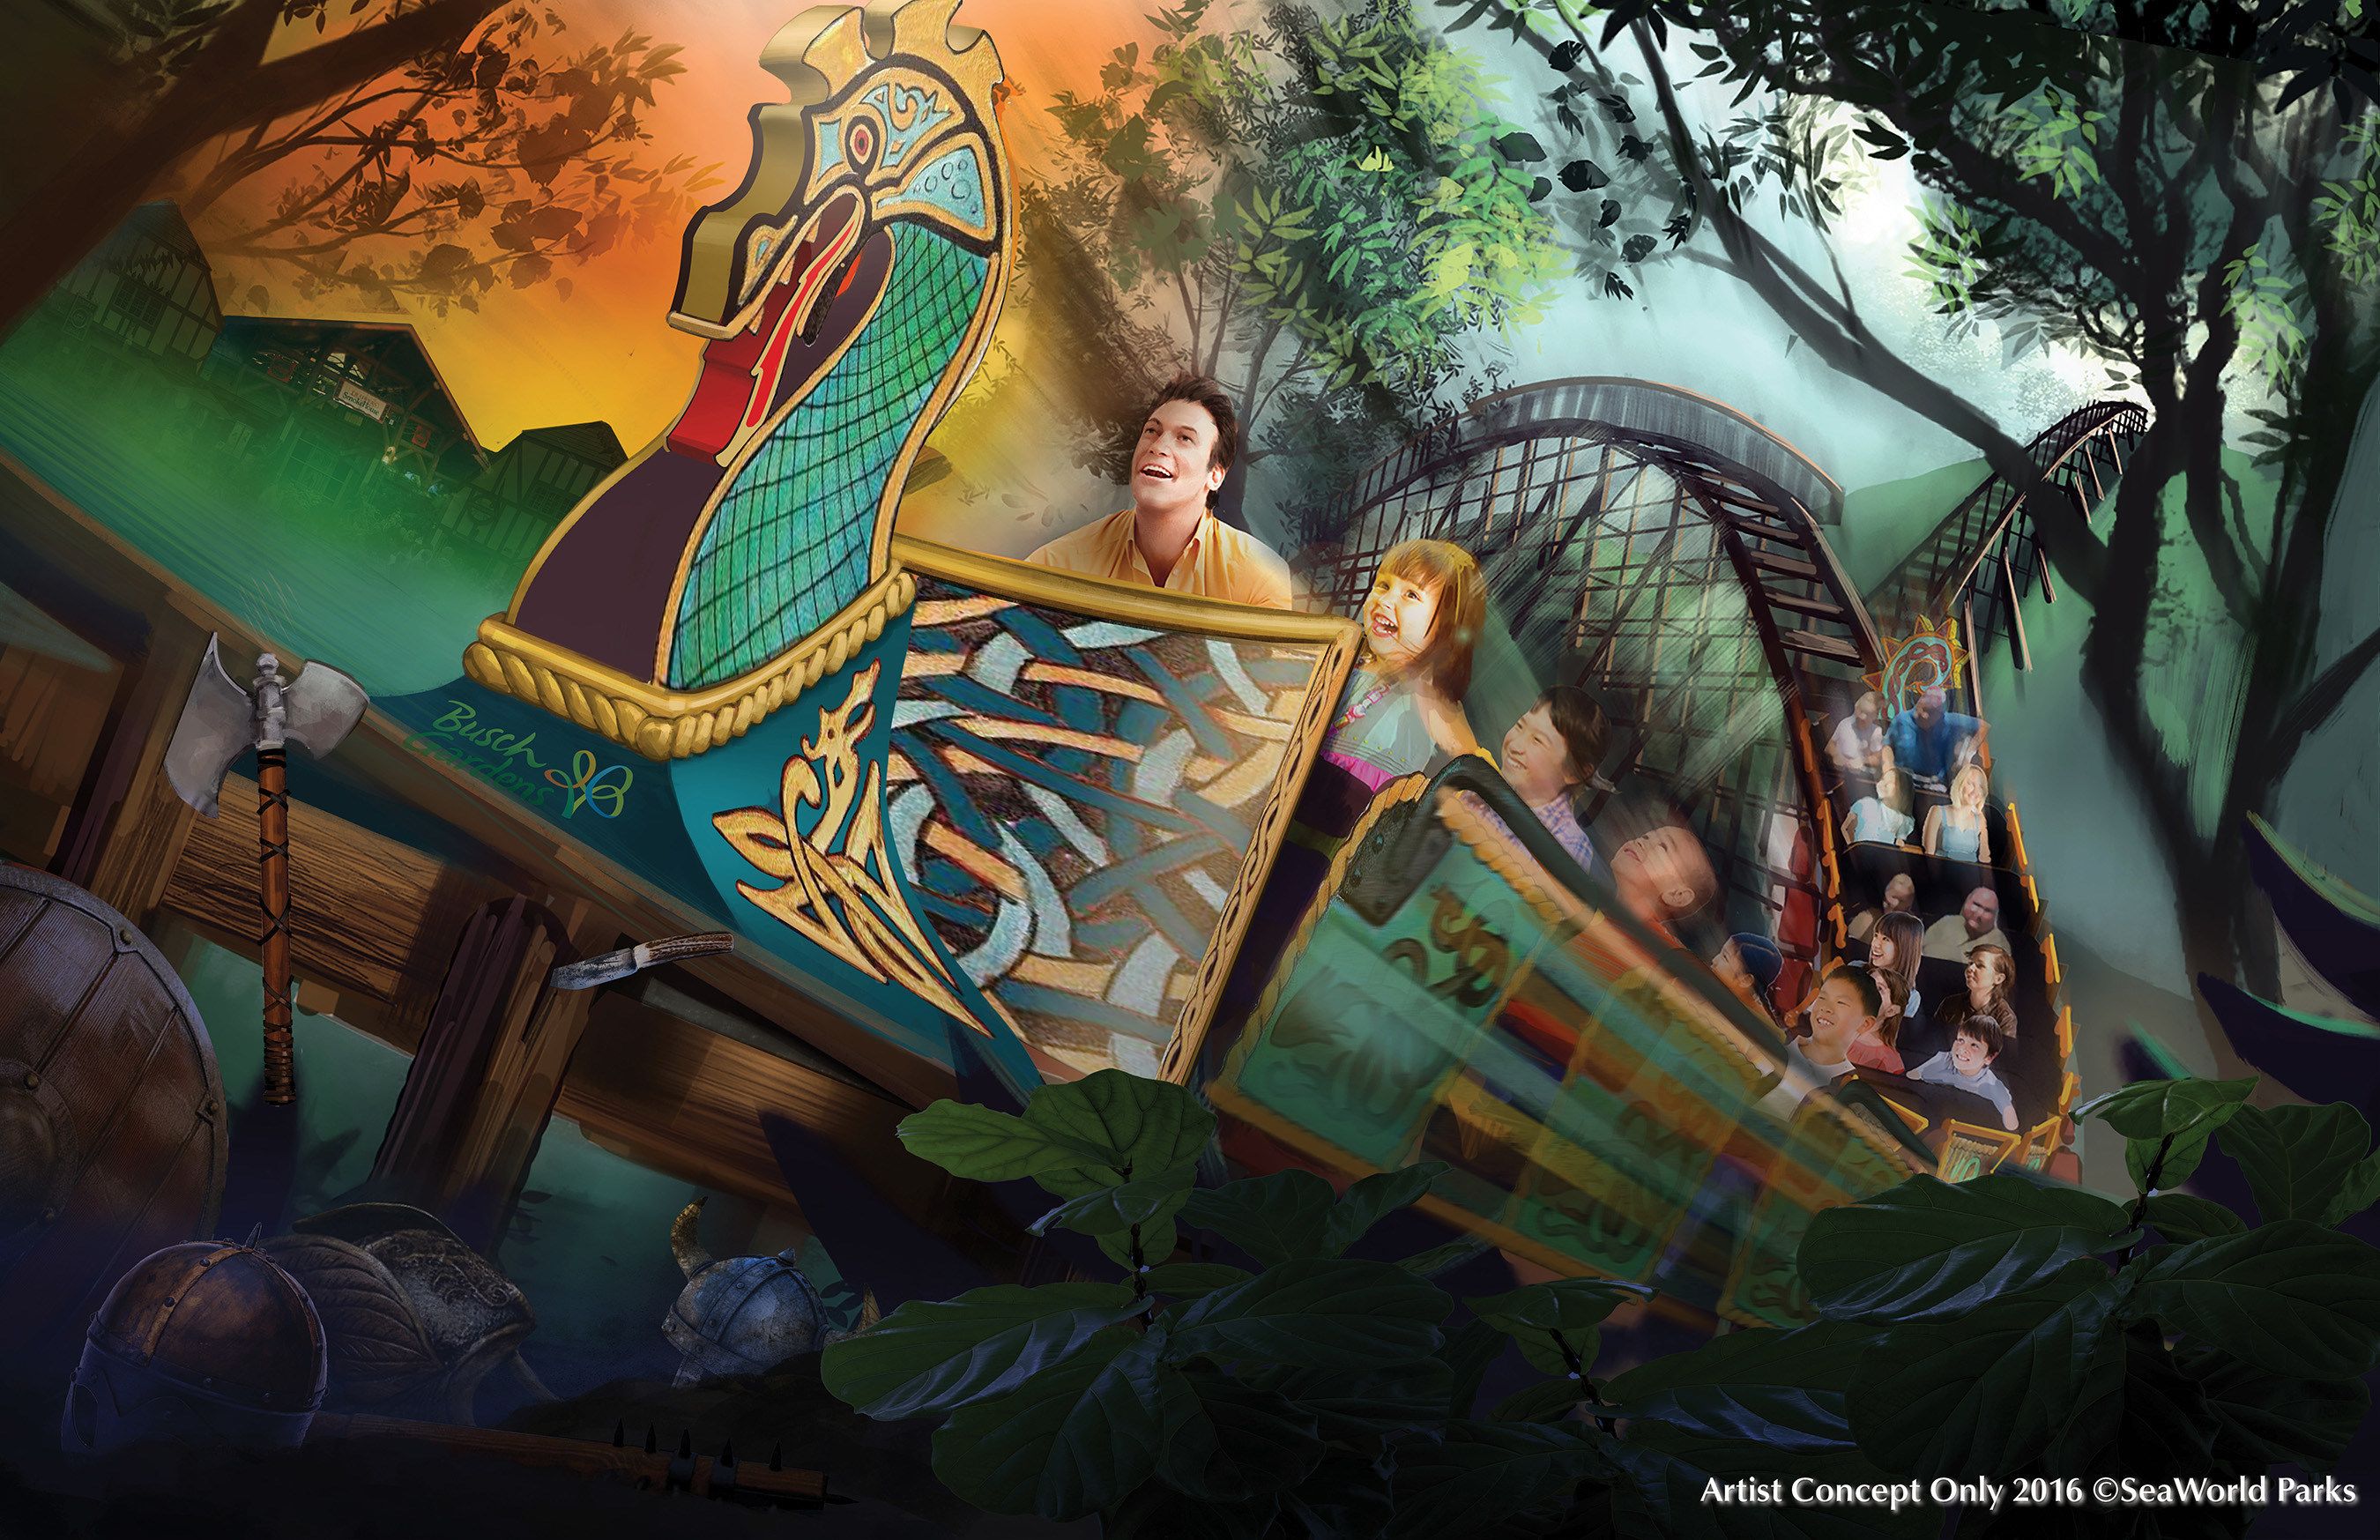 A new wooden roller coaster, InvadR, will join Busch Gardens Williamsburg's collection of world-class thrill rides, launching spring 2017.  The family thriller will be the park's first wooden coaster and eighth roller coaster in total.  Exciting ride elements include a more than 70-foot-drop and nine airtime hills, and will thrill adults and kids alike as they travel more than 2,100 feet through wooded terrain and underground through a tunnel. Credit: Artist Concept Only - 2016 (C)SeaWorld Parks